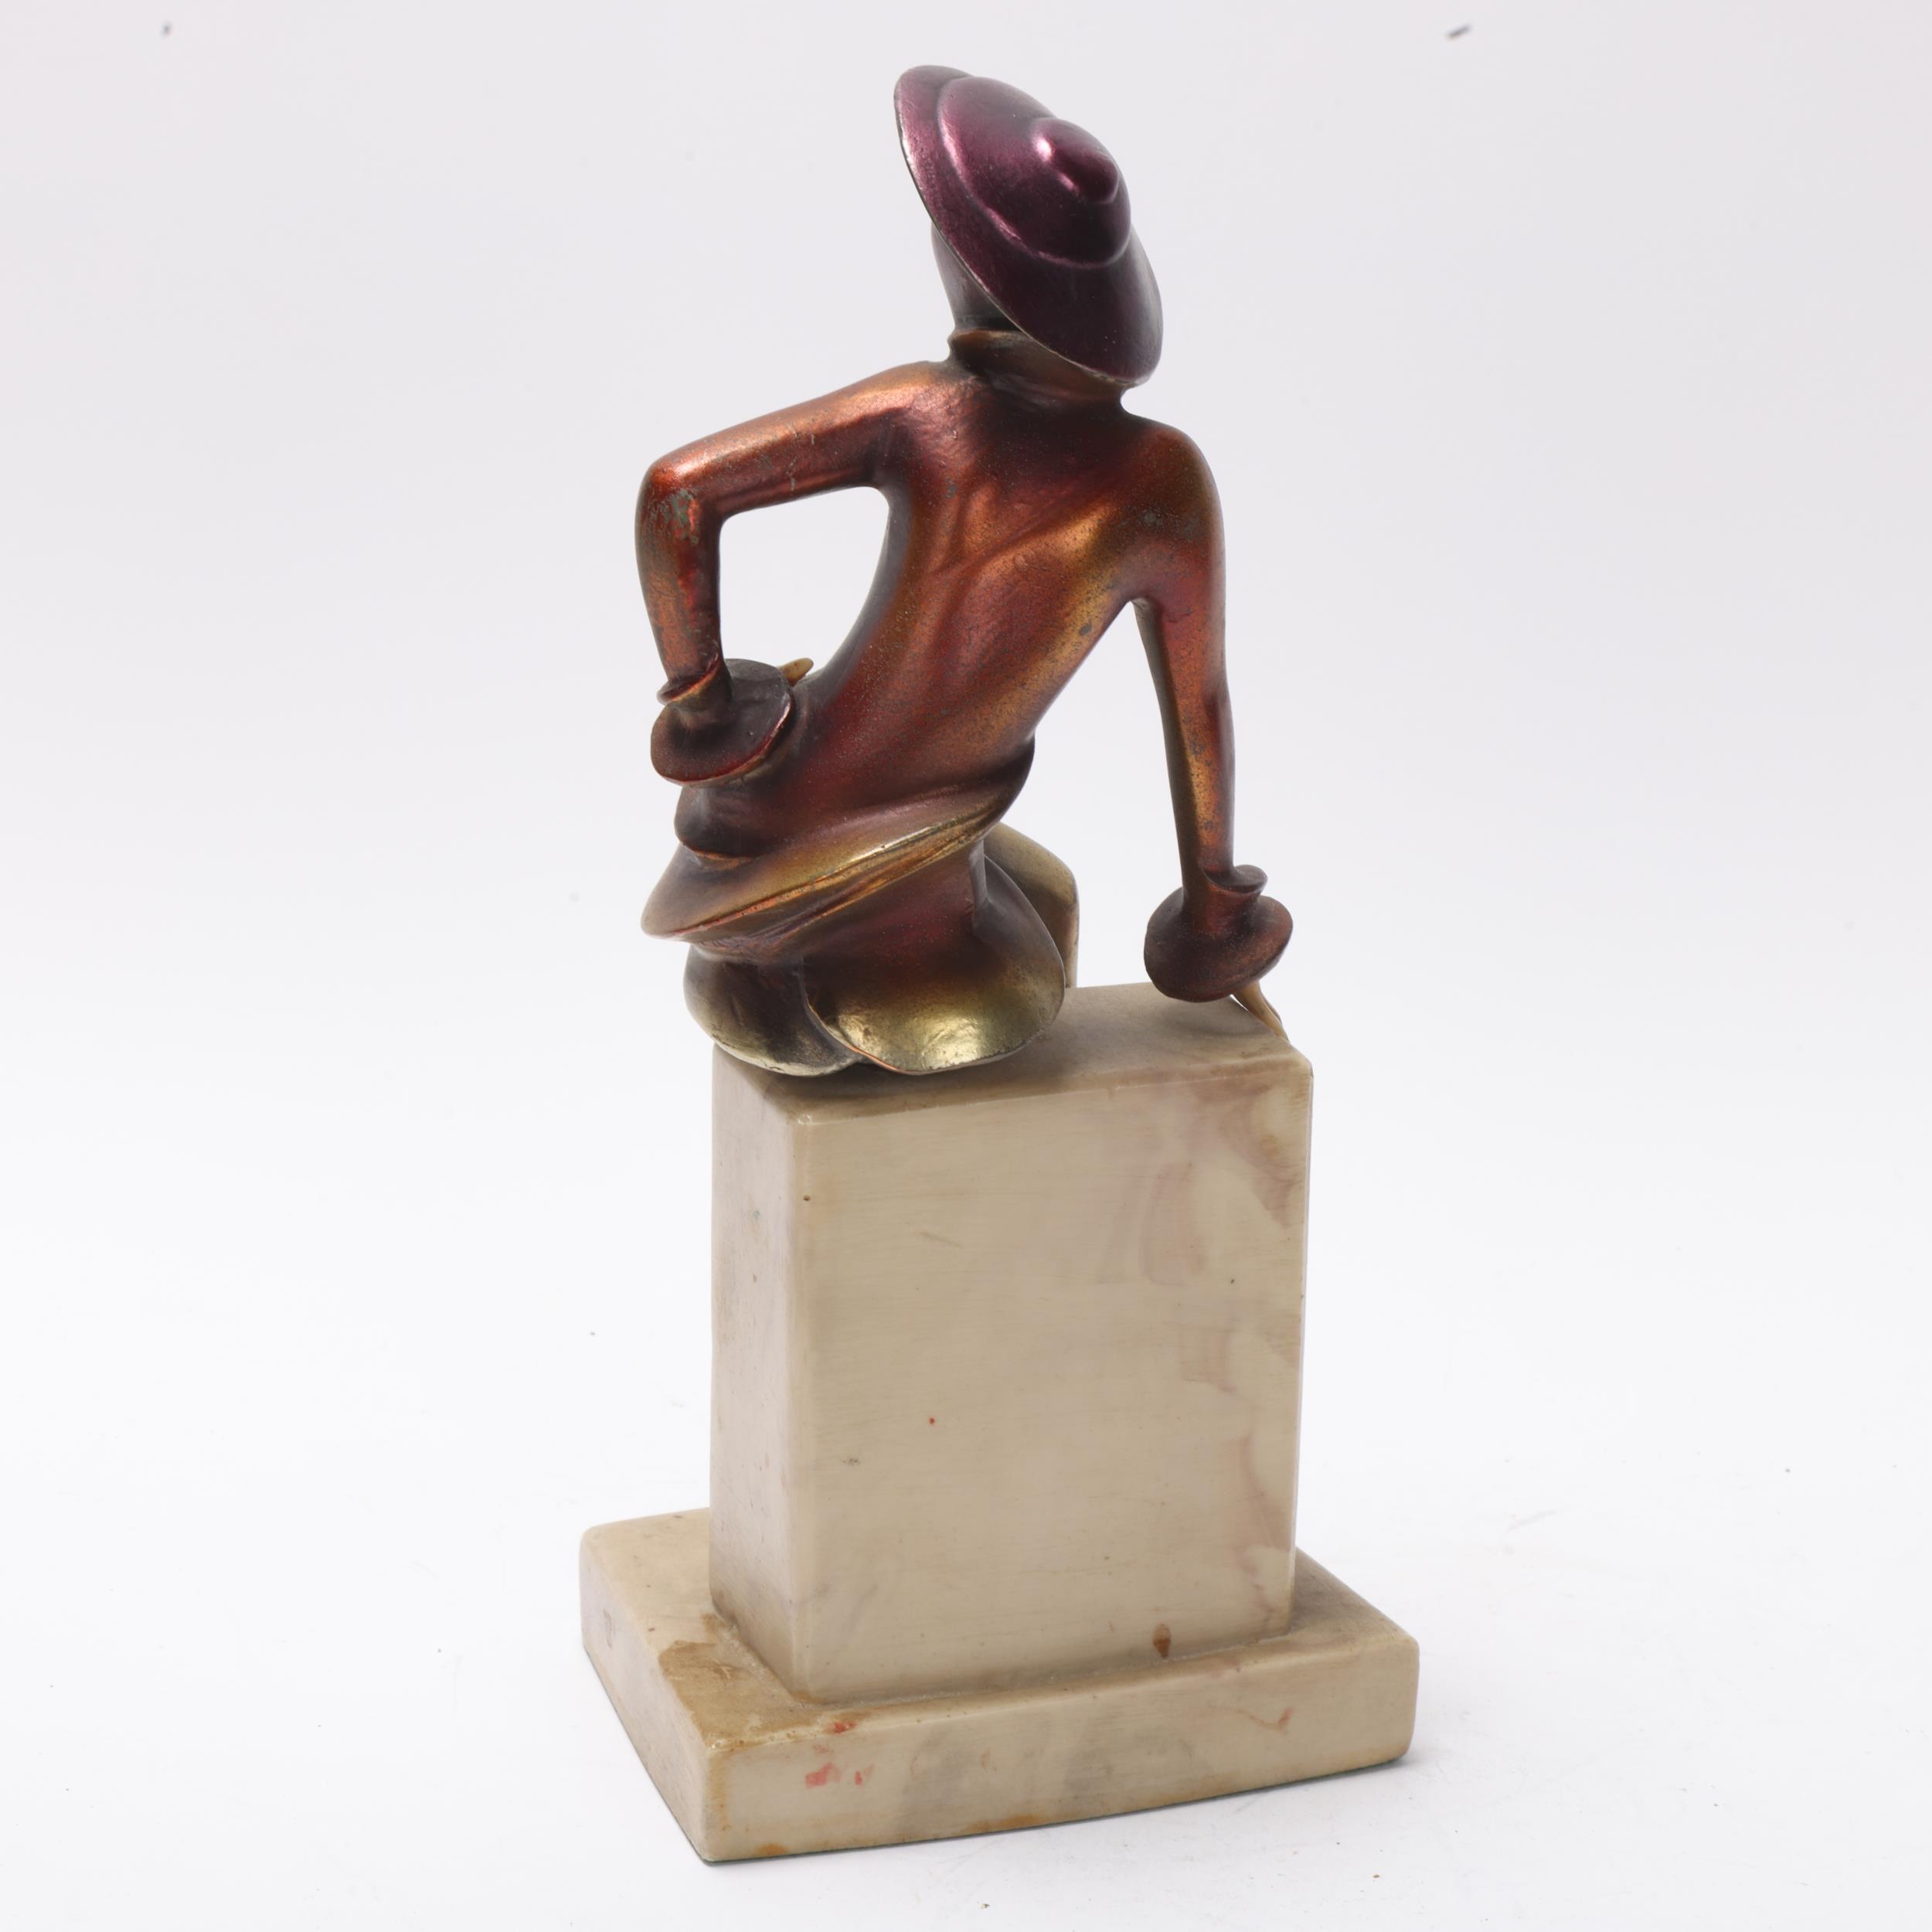 Art Deco patinated spelter figure of a lady, composition face and hands on simulated marble base, - Image 3 of 3